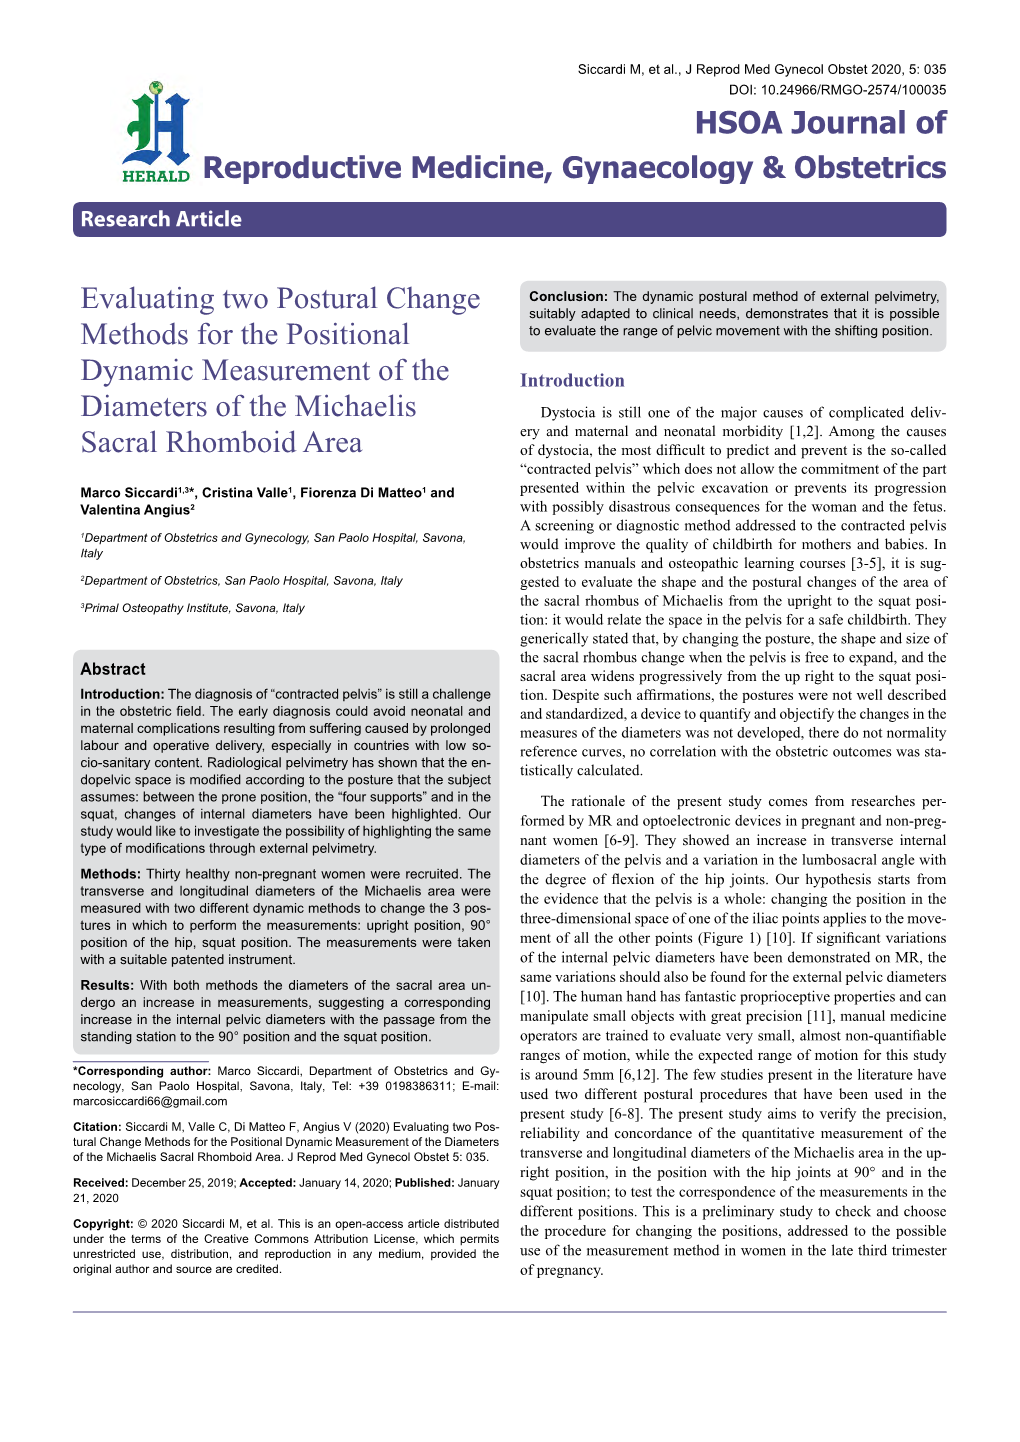 Evaluating Two Postural Change Methods for the Positional Dynamic Measurement of the Diameters of the Michaelis Sacral Rhomboid Area